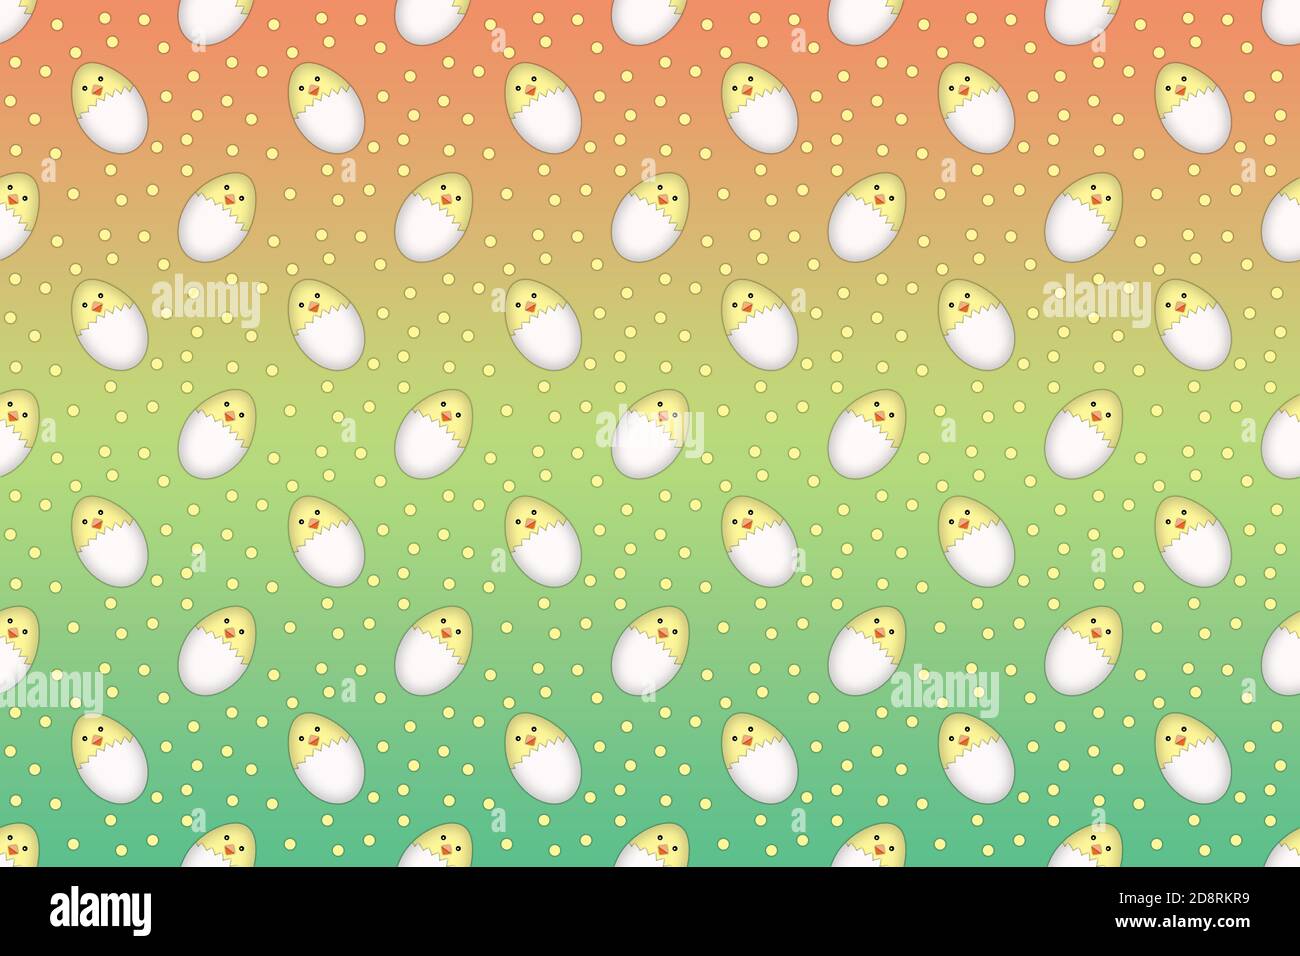 A seamless Easter background illustration of cute yellow easter chicks eggs and polka dots against a light rainbow color background Stock Photo